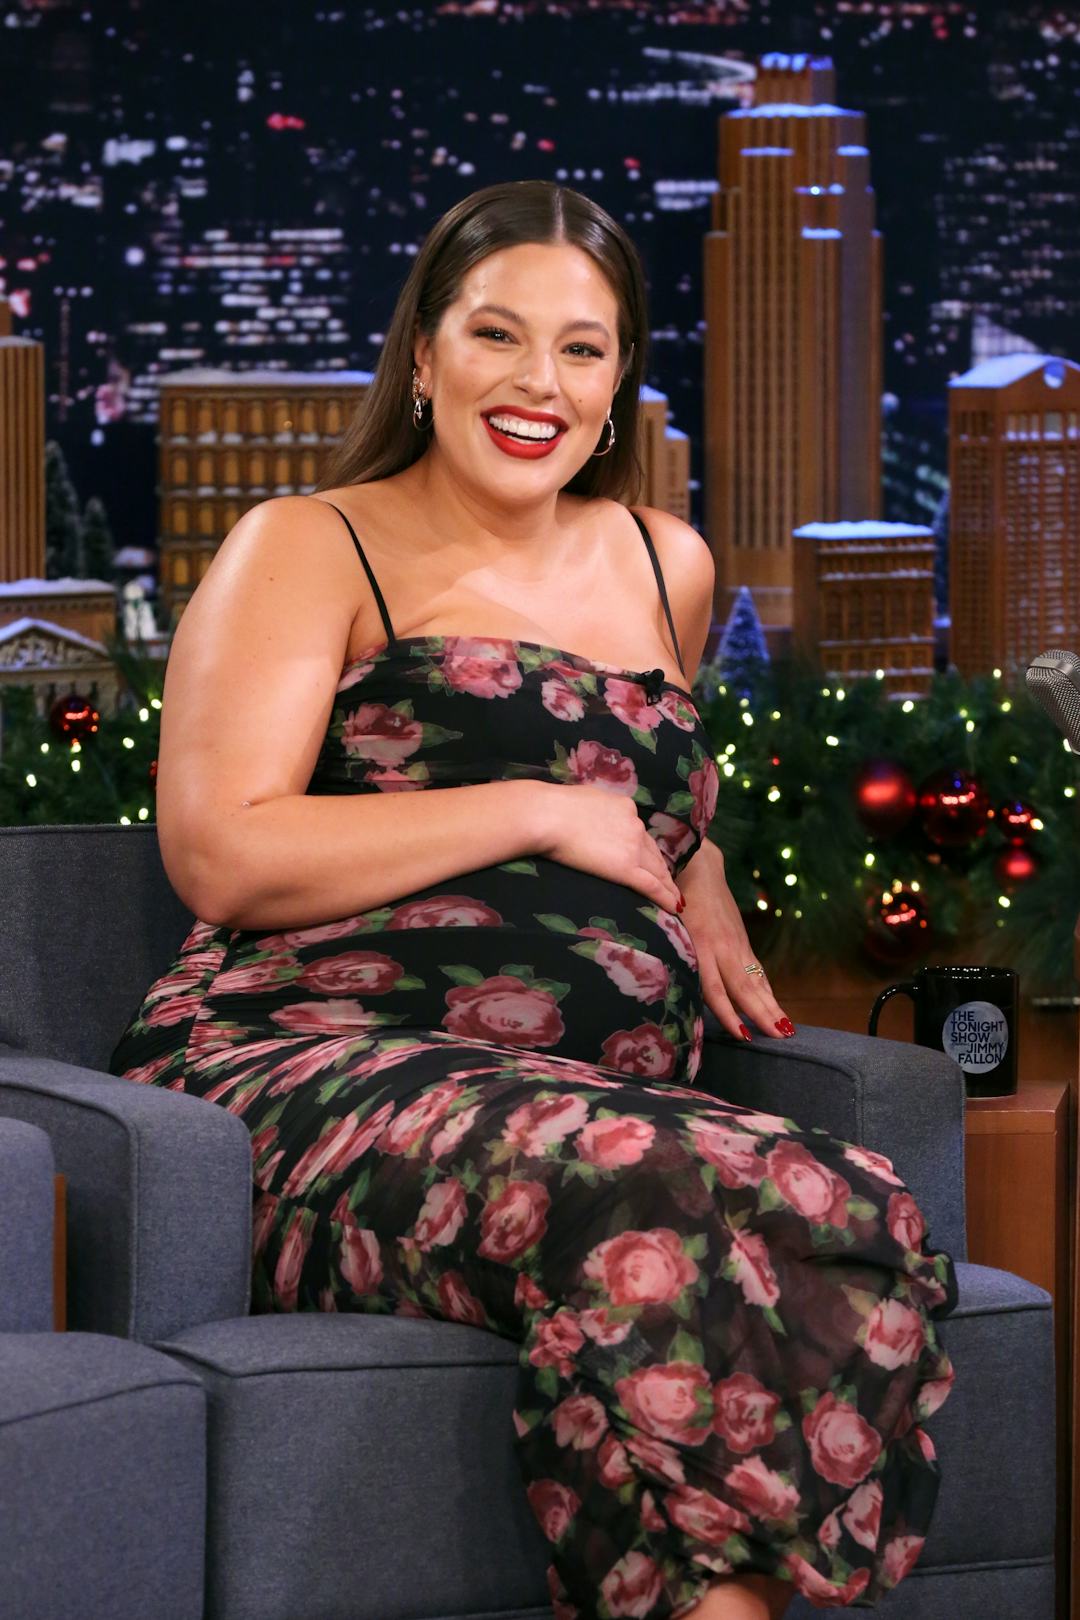 Ashley Graham S Breastfeeding Photo Is More Than Just A Real Moment